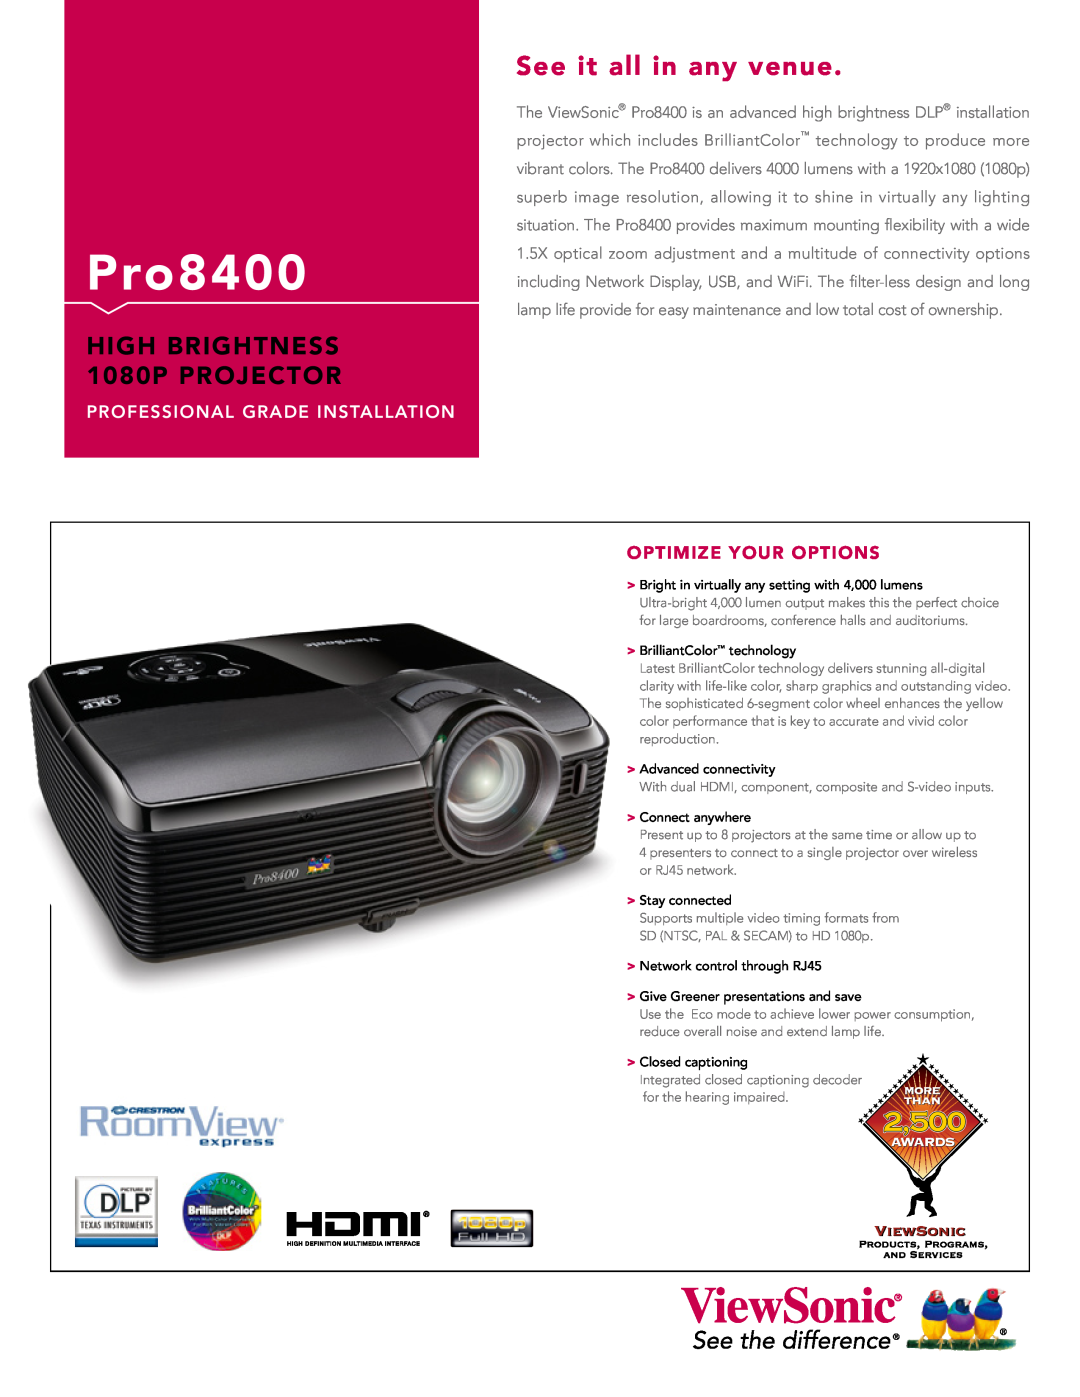 ViewSonic PRO8400 manual Pro8400, See it all in any venue, HIGH BRIGHTNESS 1080P PROJECTOR, Optimize Your Options 